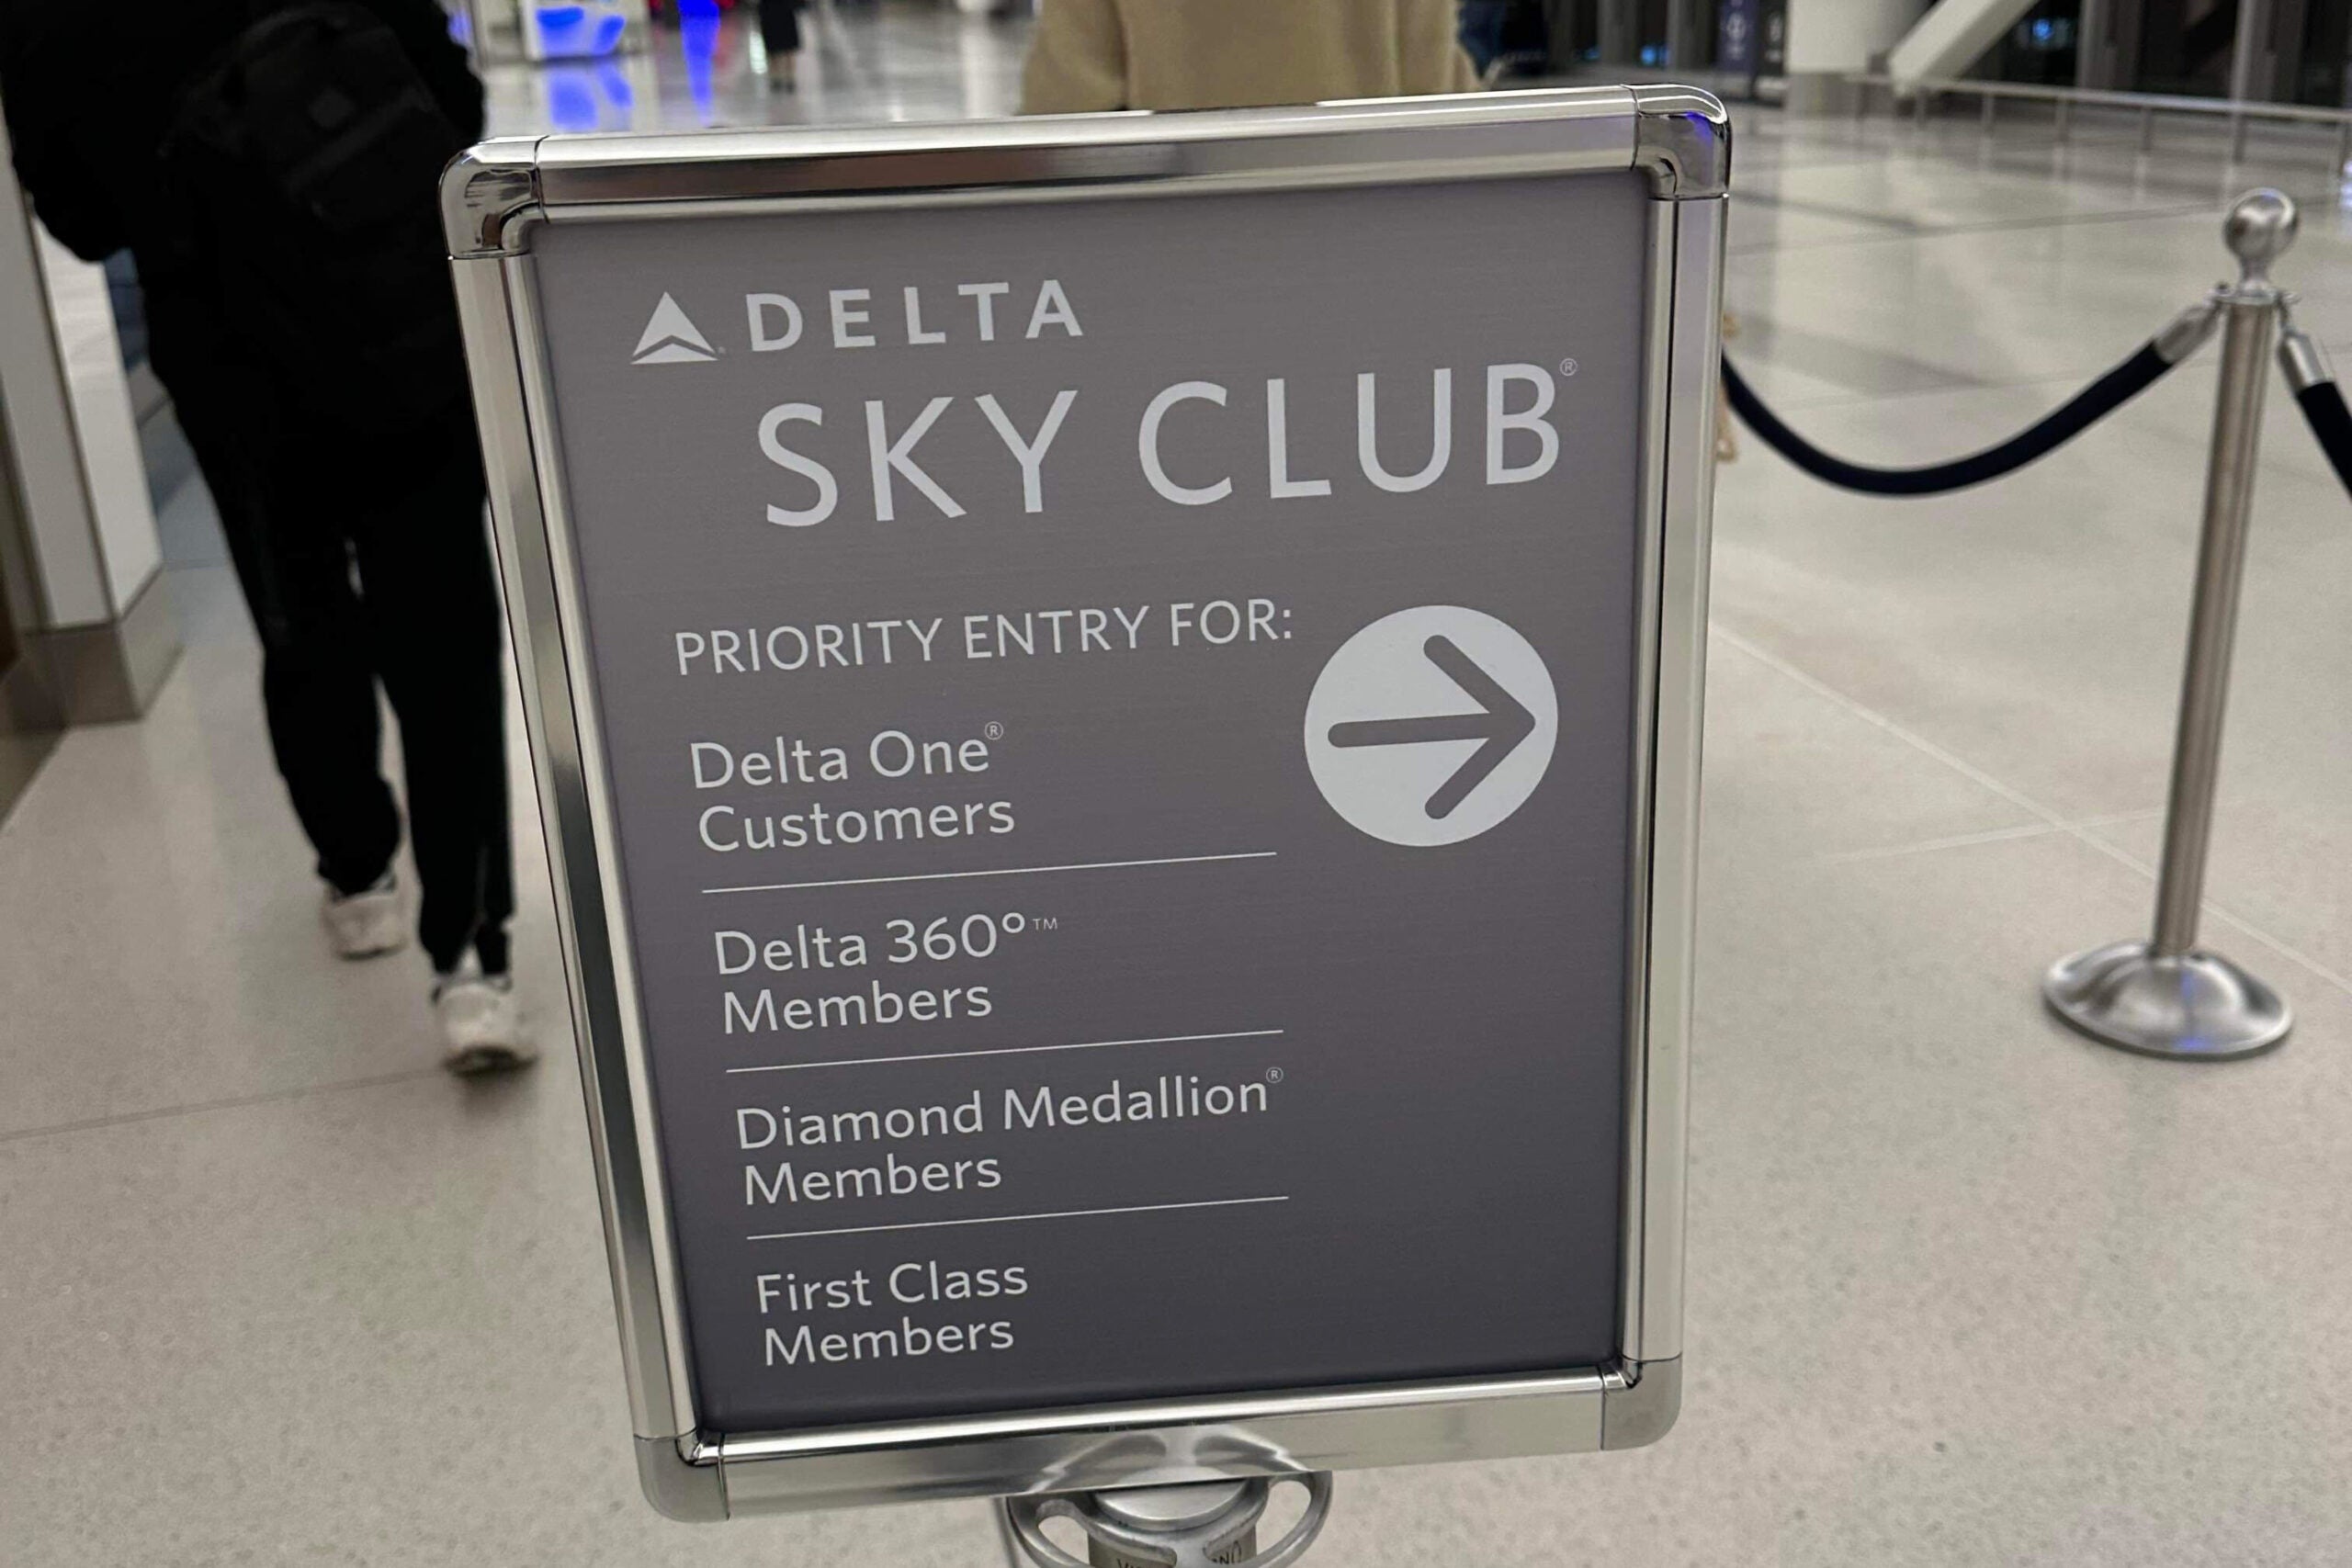 delta-now-offers-priority-boarding-at-sky-clubs-to-skip-the-wait